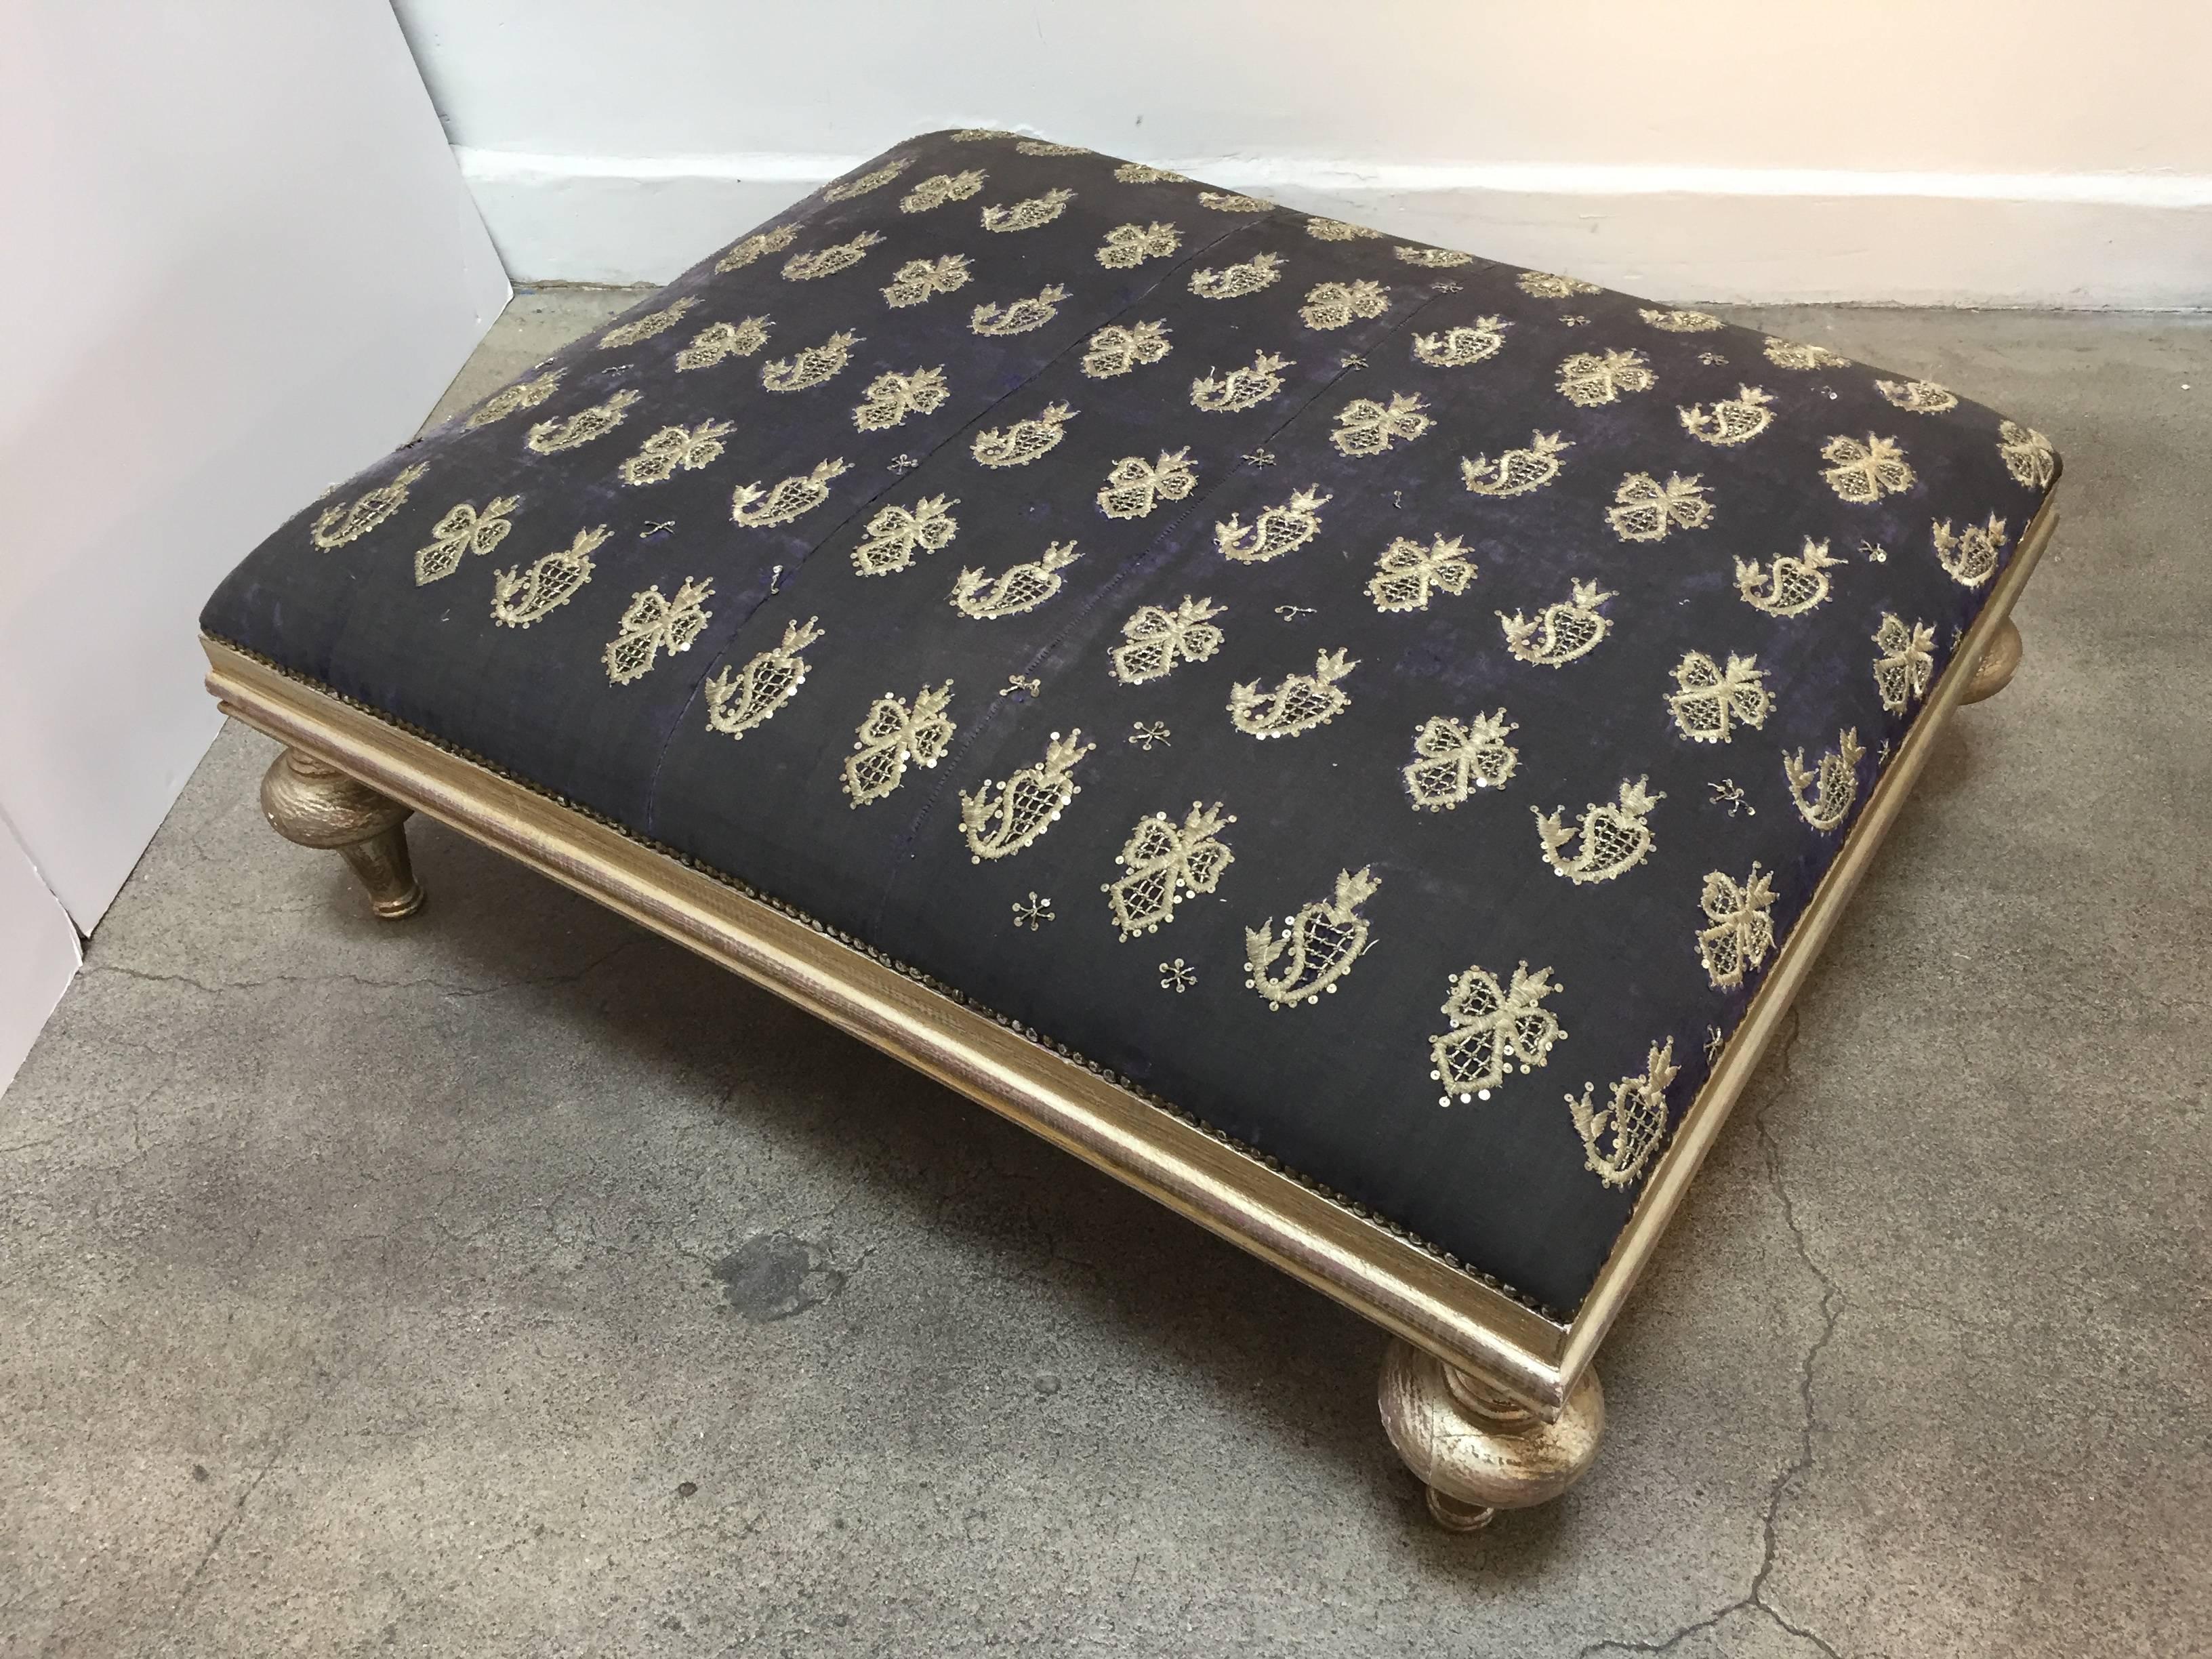 Beautiful Middle Eastern coffee table or ottoman from Lebanon.
The seat is upholstered with an old black Moorish textile embroidered with gold and silver treads. The frame has turned legs in gilt color. 
Decorative with antiqued bronze spaced